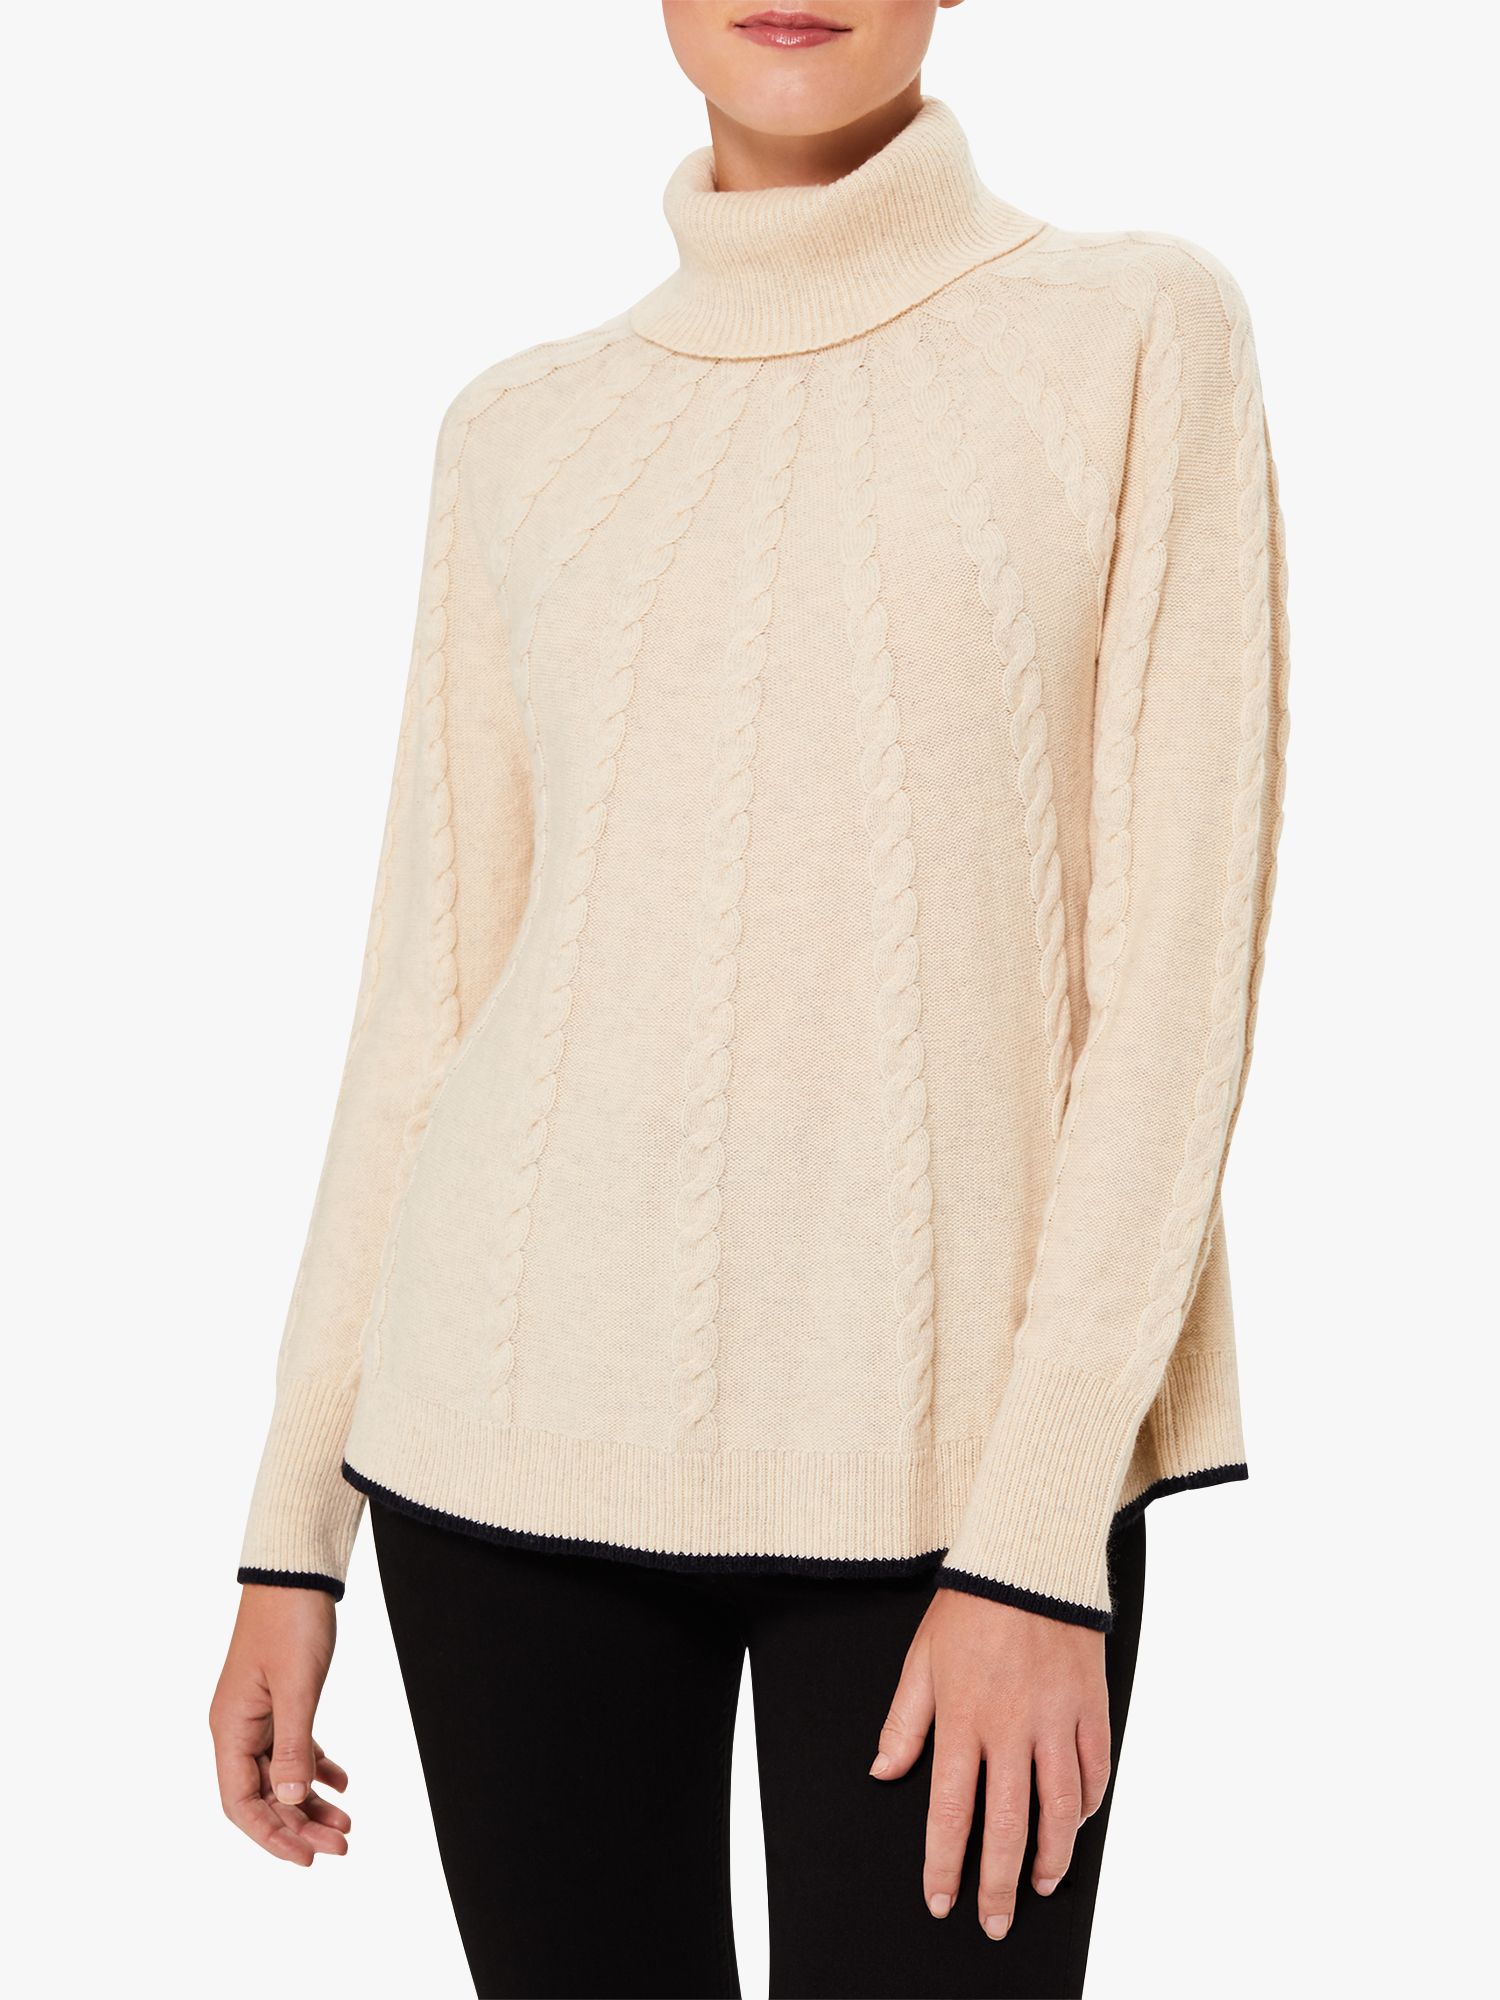 Hobbs Demi Cable Knit Jumper, Oatmeal/Navy